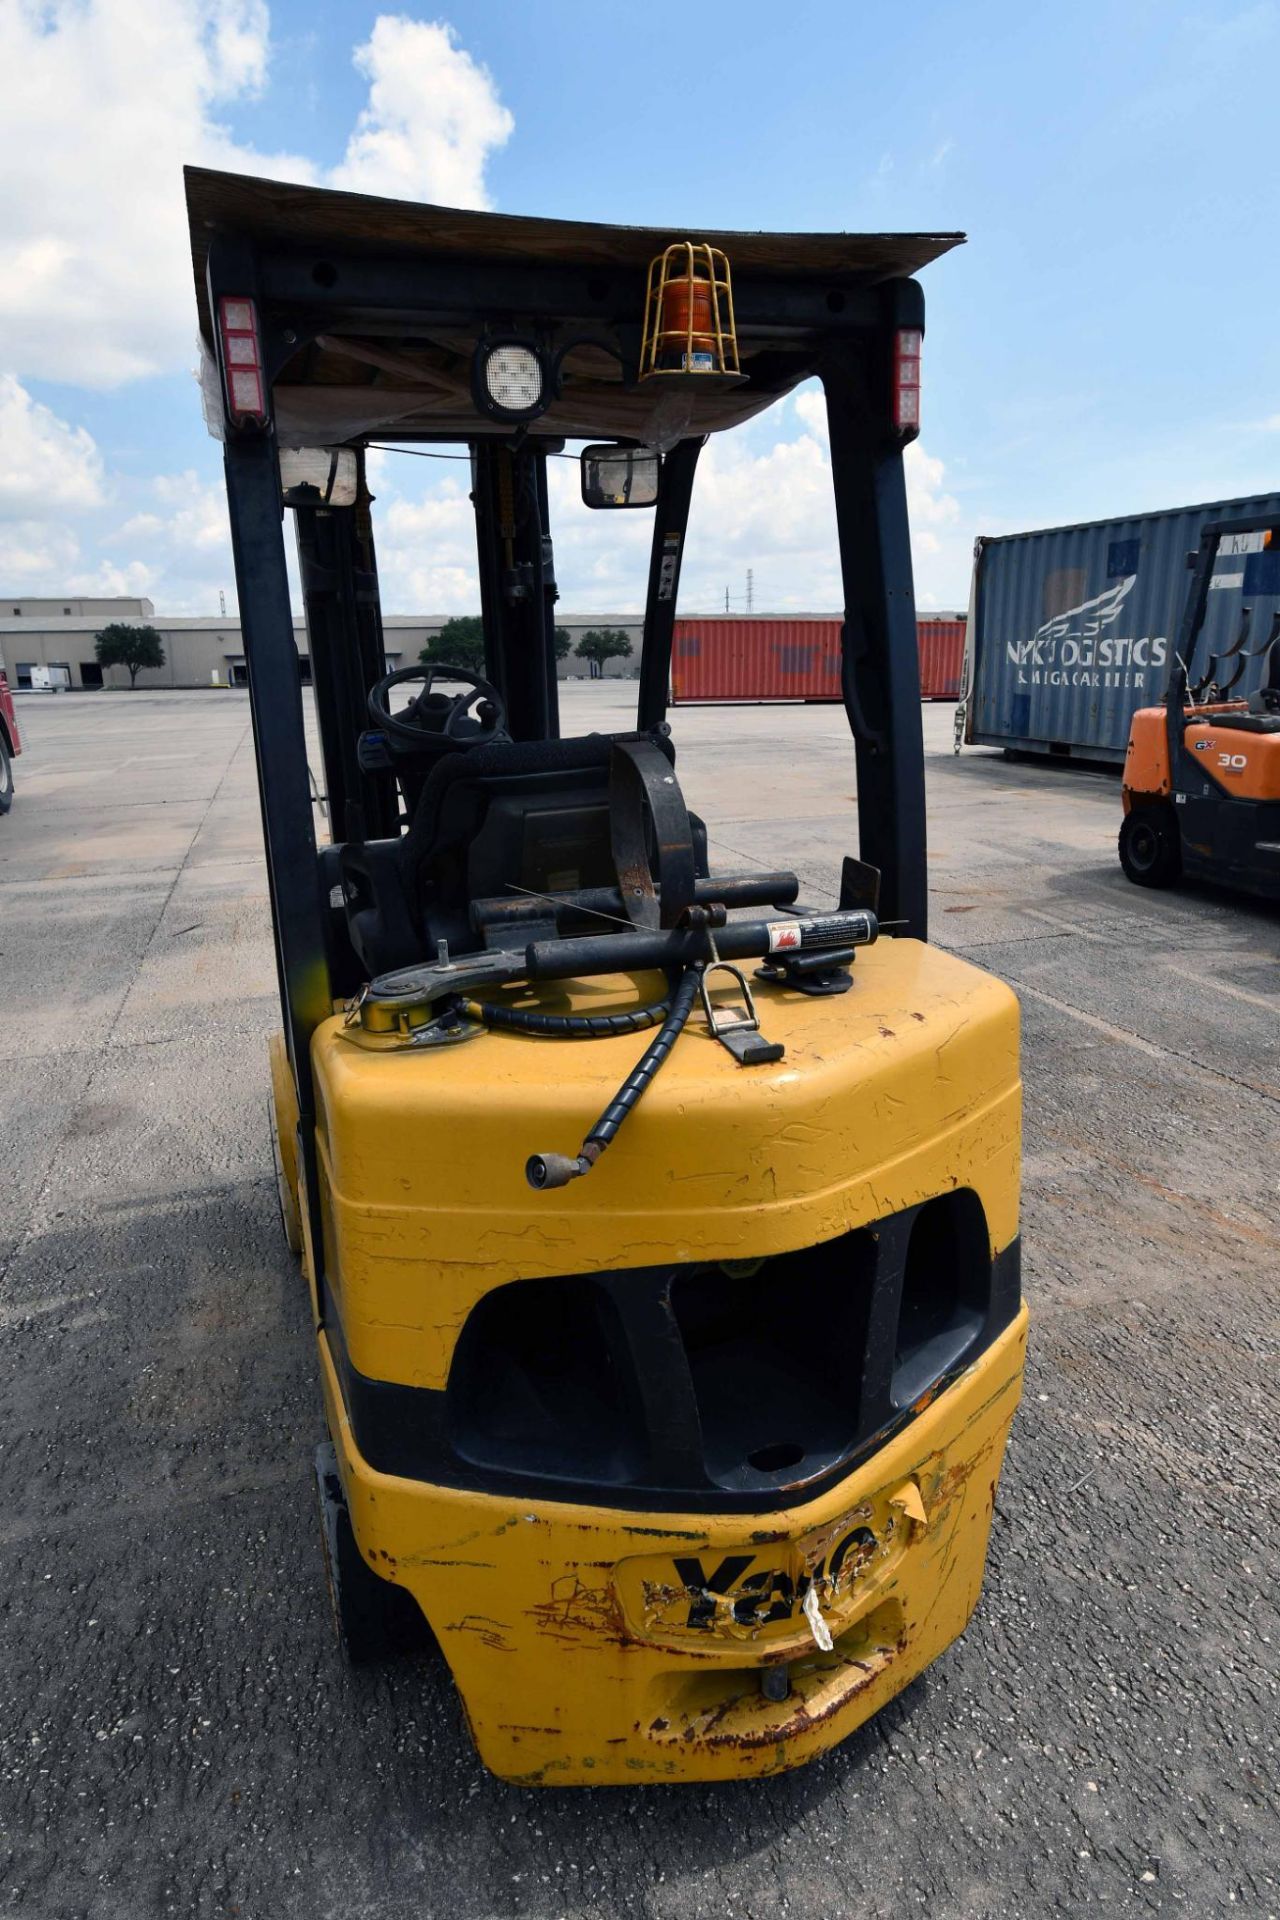 FORKLIFT, YALE VERACITOR 7,000-LB. BASE CAP. MDL. GLC070VXNDSE088, LPG, 6,500-lb. cap. as equipped, - Image 3 of 5